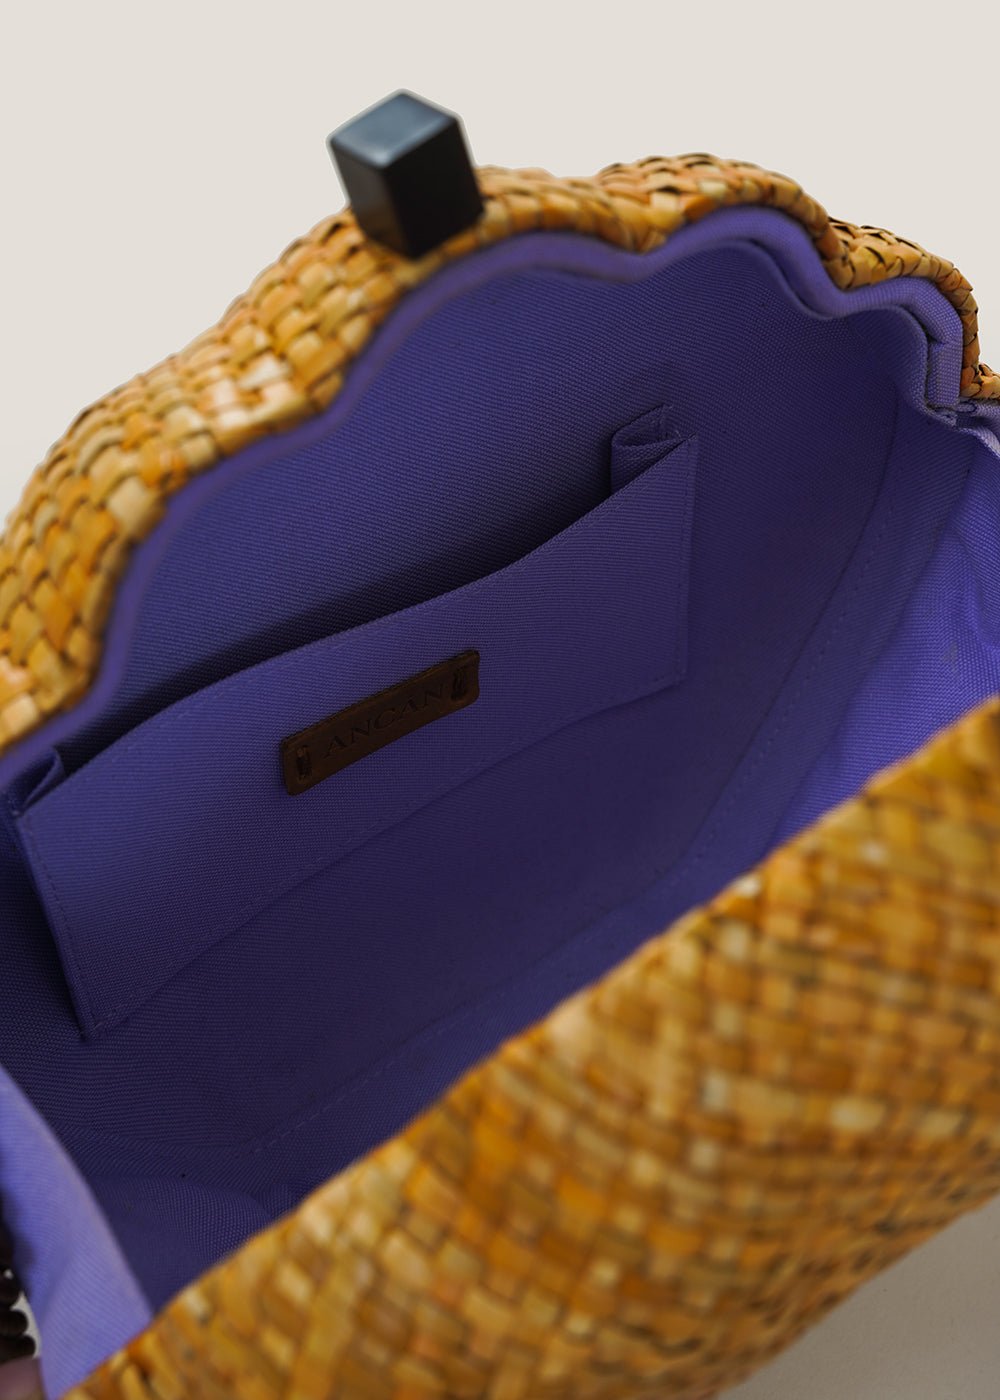 Ancán Sol Clutch - New Classics Studios Sustainable Ethical Fashion Canada